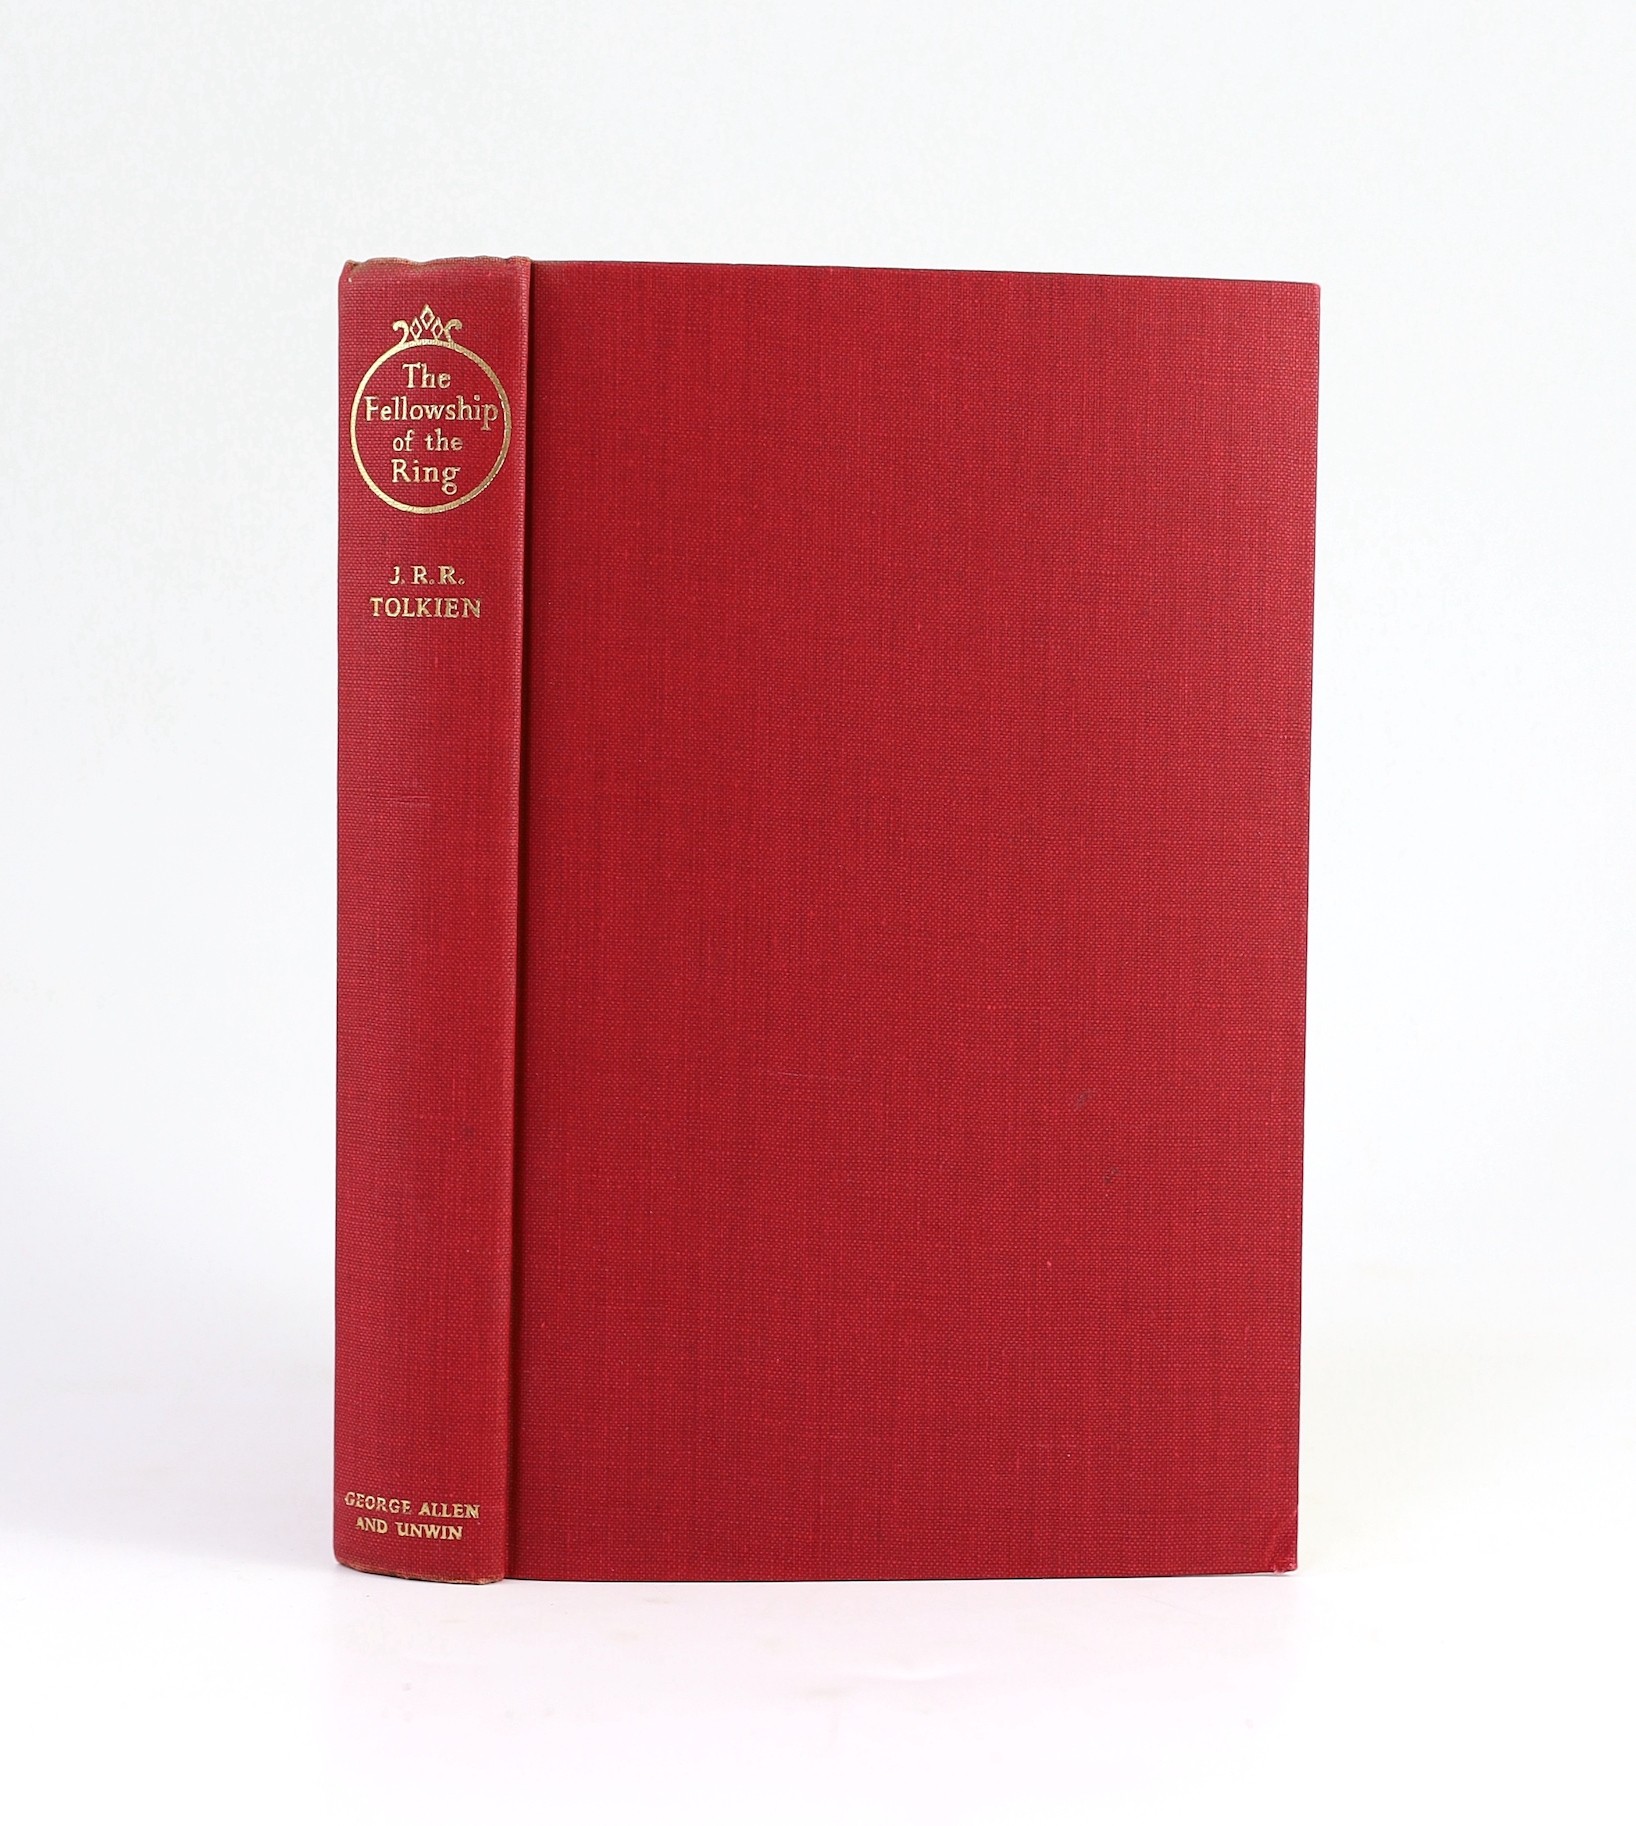 ° ° Tolkien, John Ronald Reuel - The Lord of the Rings, 1st editions, 1st impressions of Towers - Image 3 of 19